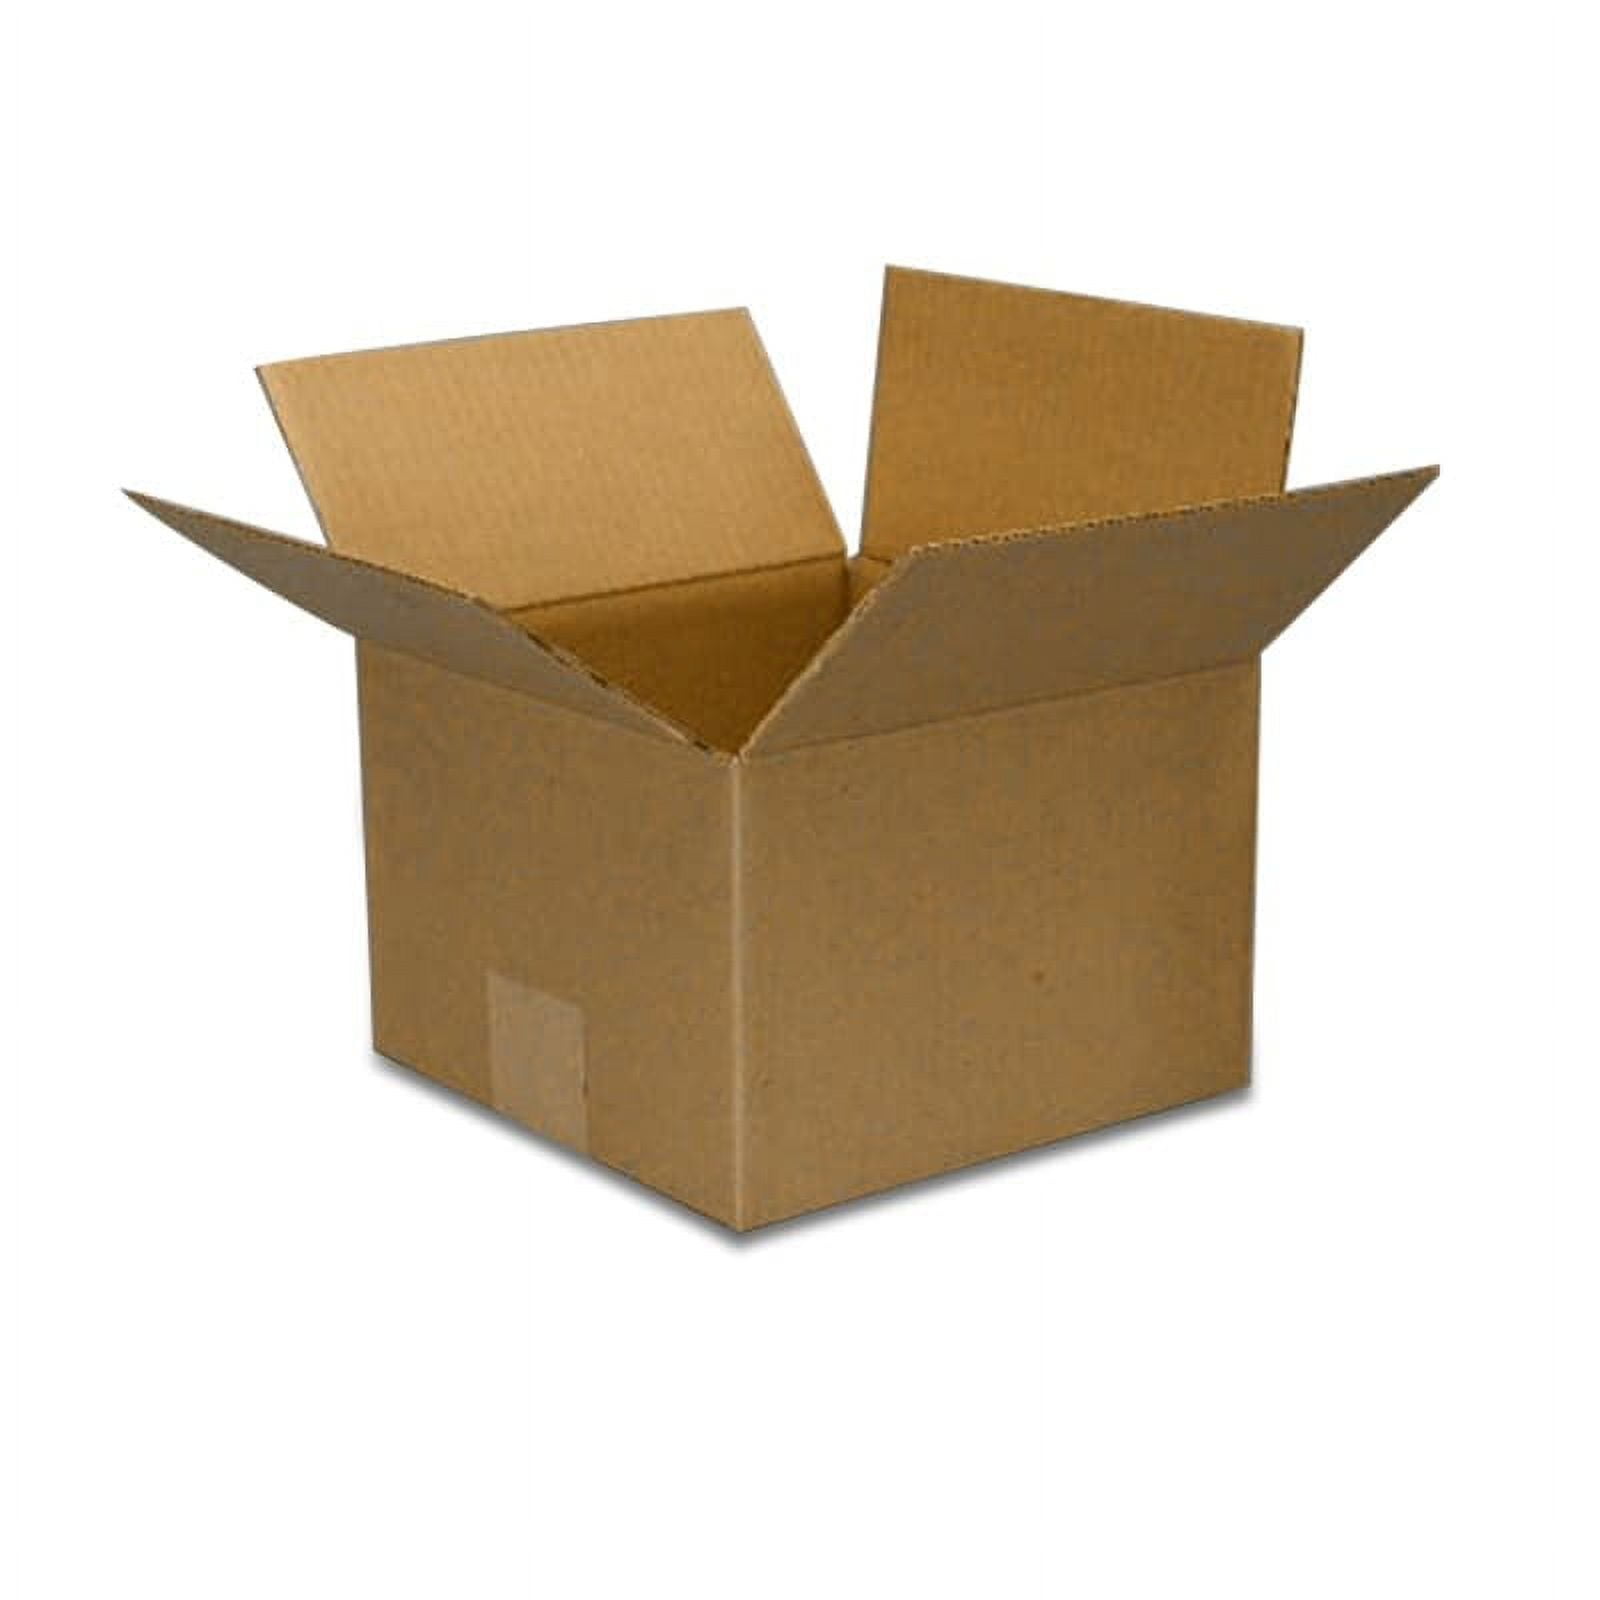 25 12x10x8 Cardboard Paper Boxes Mailing Packing Shipping Box Corrugated  Carton